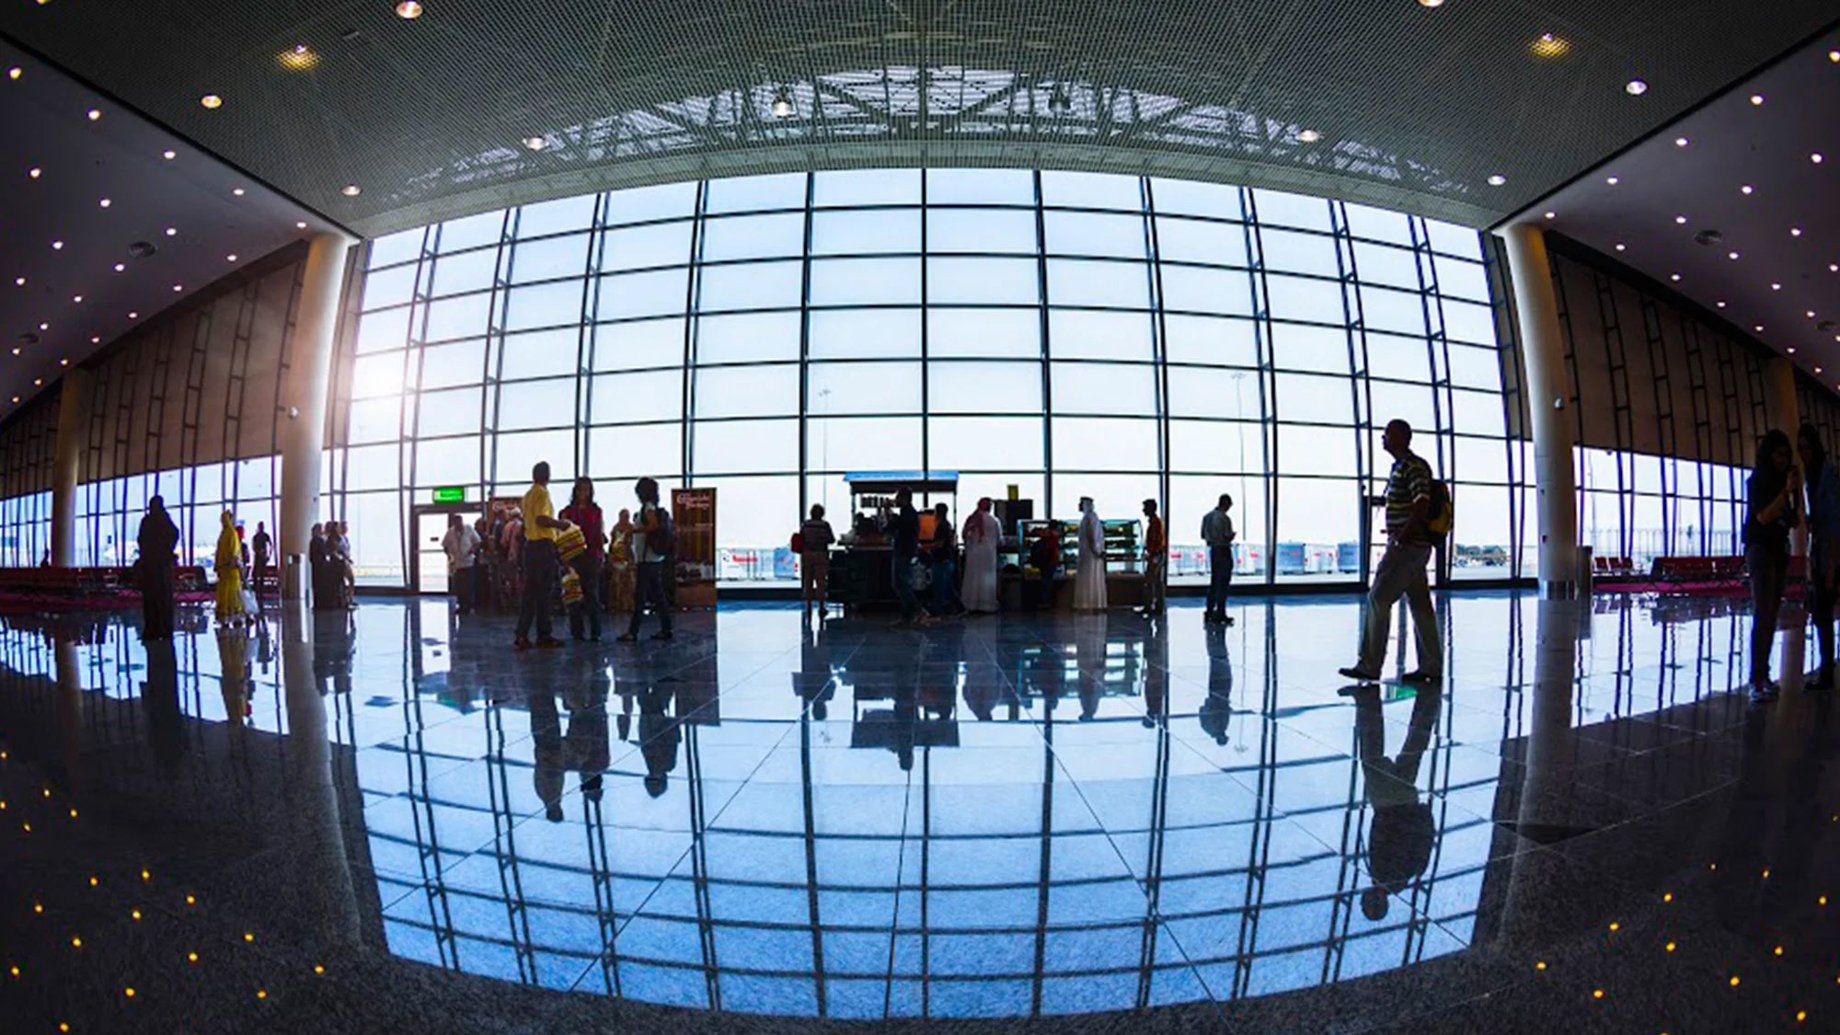 An airport - Arup regularly applies its ORAT approach to opening new airports and terminals